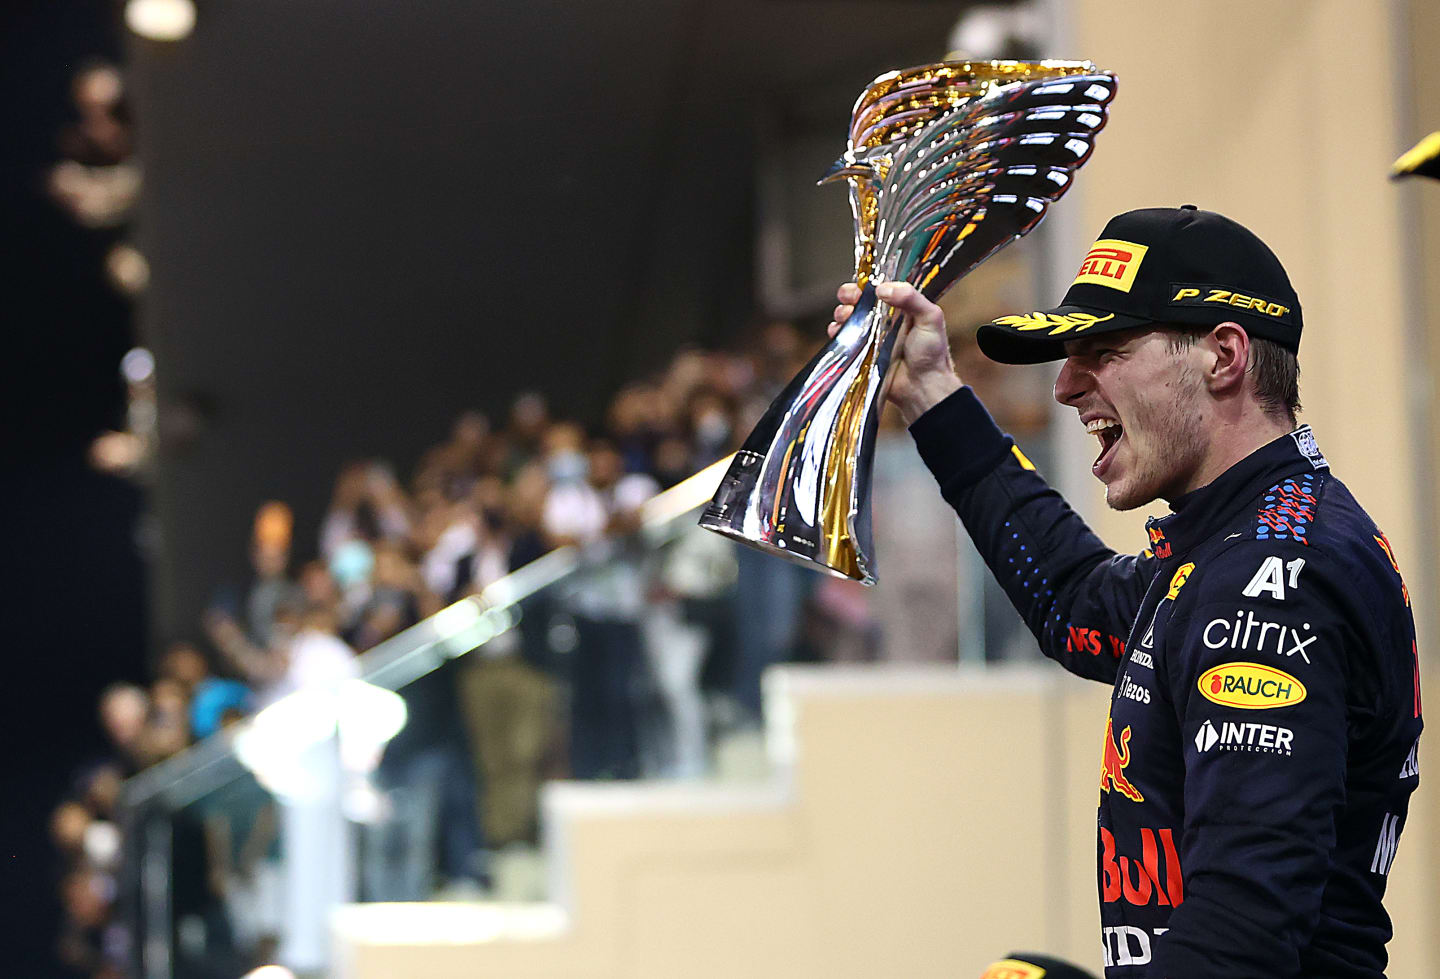 ABU DHABI, UNITED ARAB EMIRATES - DECEMBER 12: Race winner and 2021 F1 World Drivers Champion Max Verstappen of Netherlands and Red Bull Racing celebrates on the podium during the F1 Grand Prix of Abu Dhabi at Yas Marina Circuit on December 12, 2021 in Abu Dhabi, United Arab Emirates. (Photo by Dan Istitene - Formula 1/Formula 1 via Getty Images)